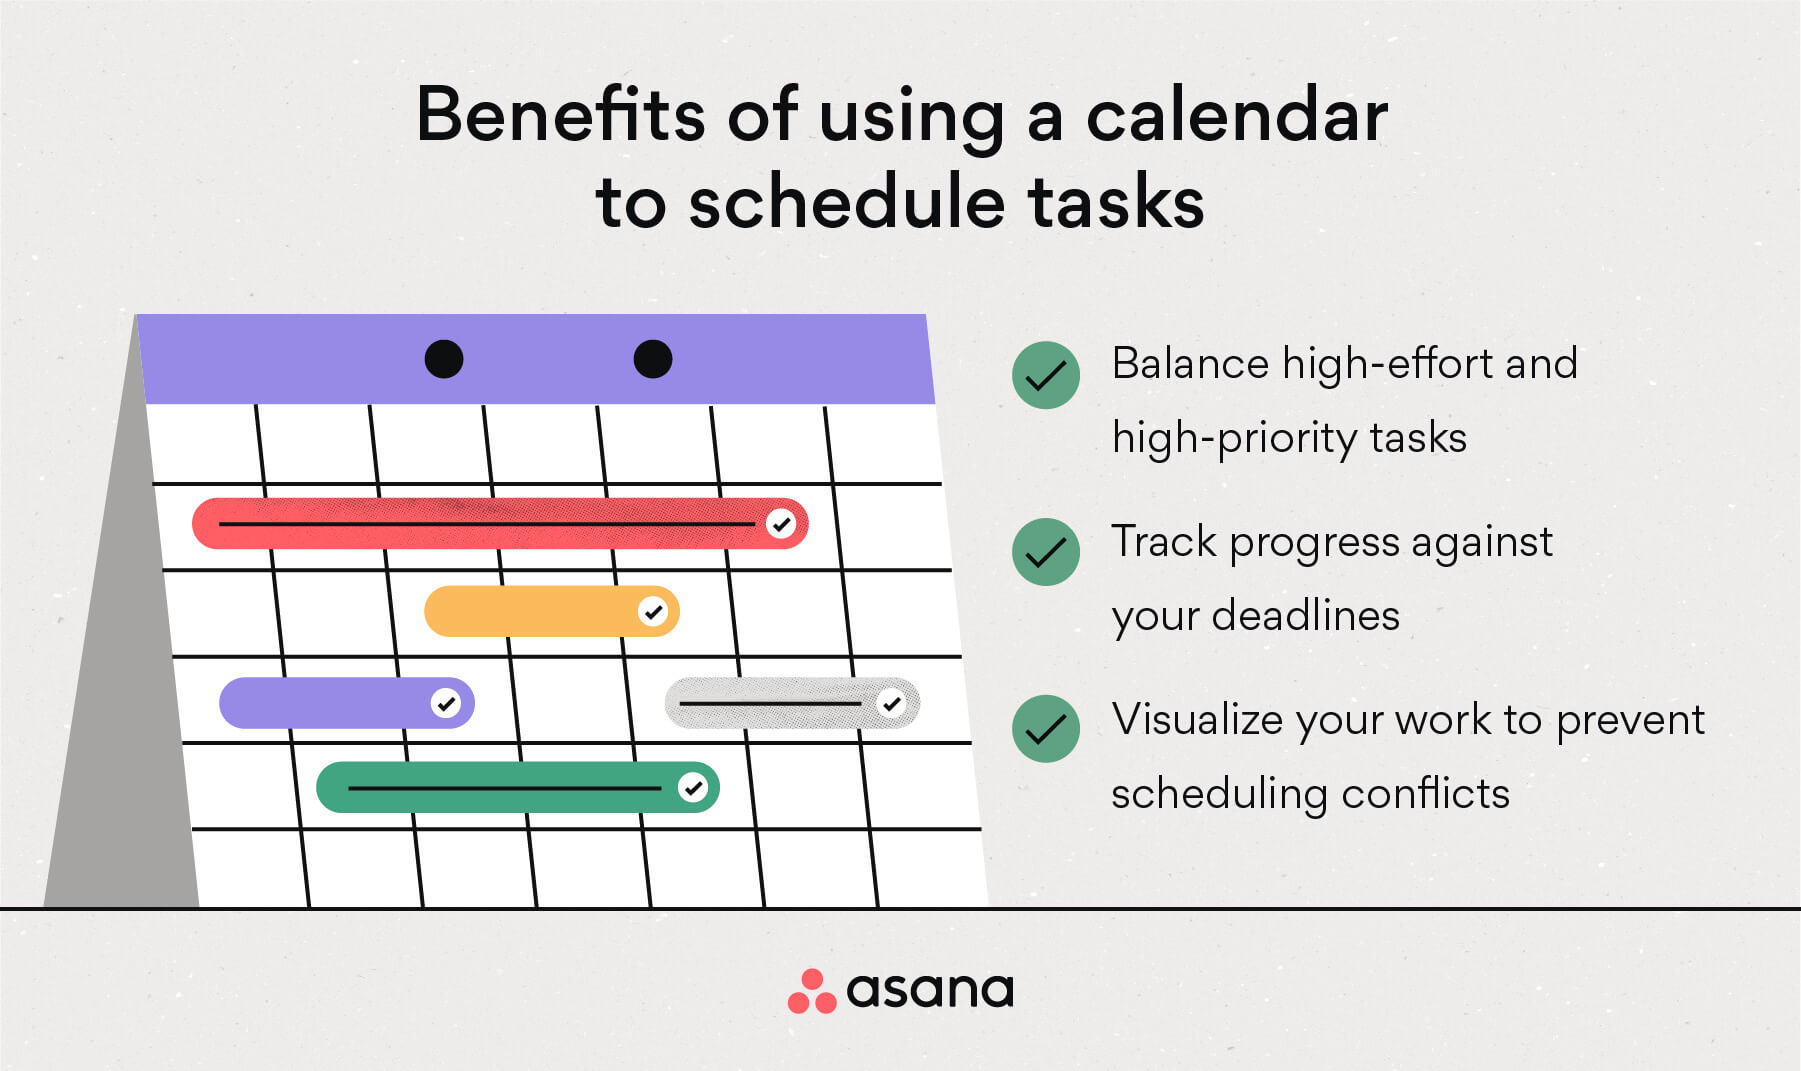 [inline illustration] Benefits of using a calendar to schedule tasks (infographic)